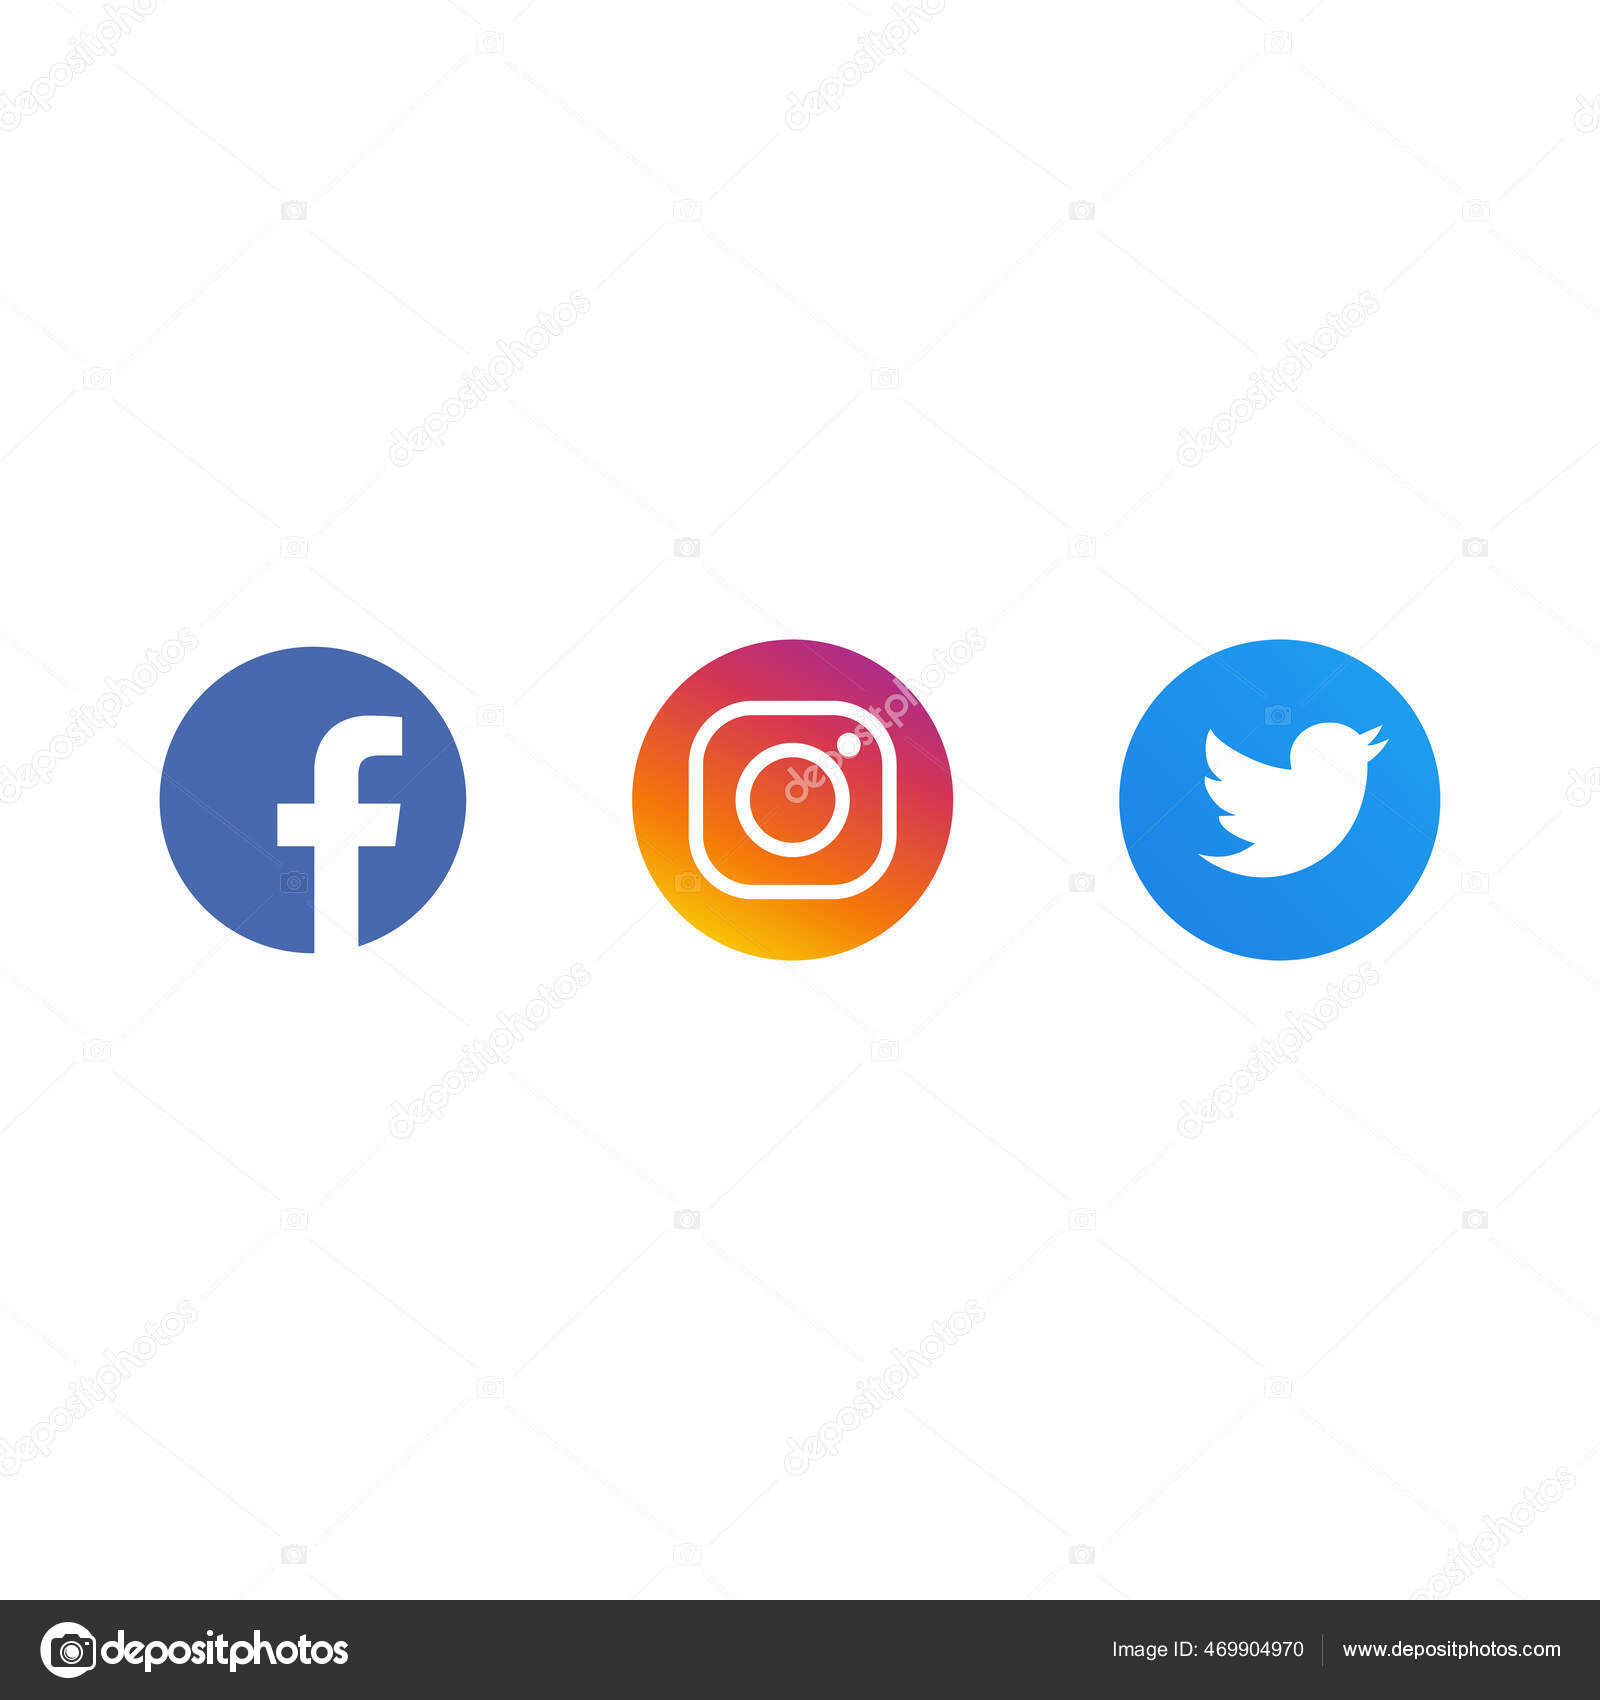 Facebook Instagram Twitter Collection Popular Social Media Logo White Background Stock Vector Image By C Leberus777 Gmail Com